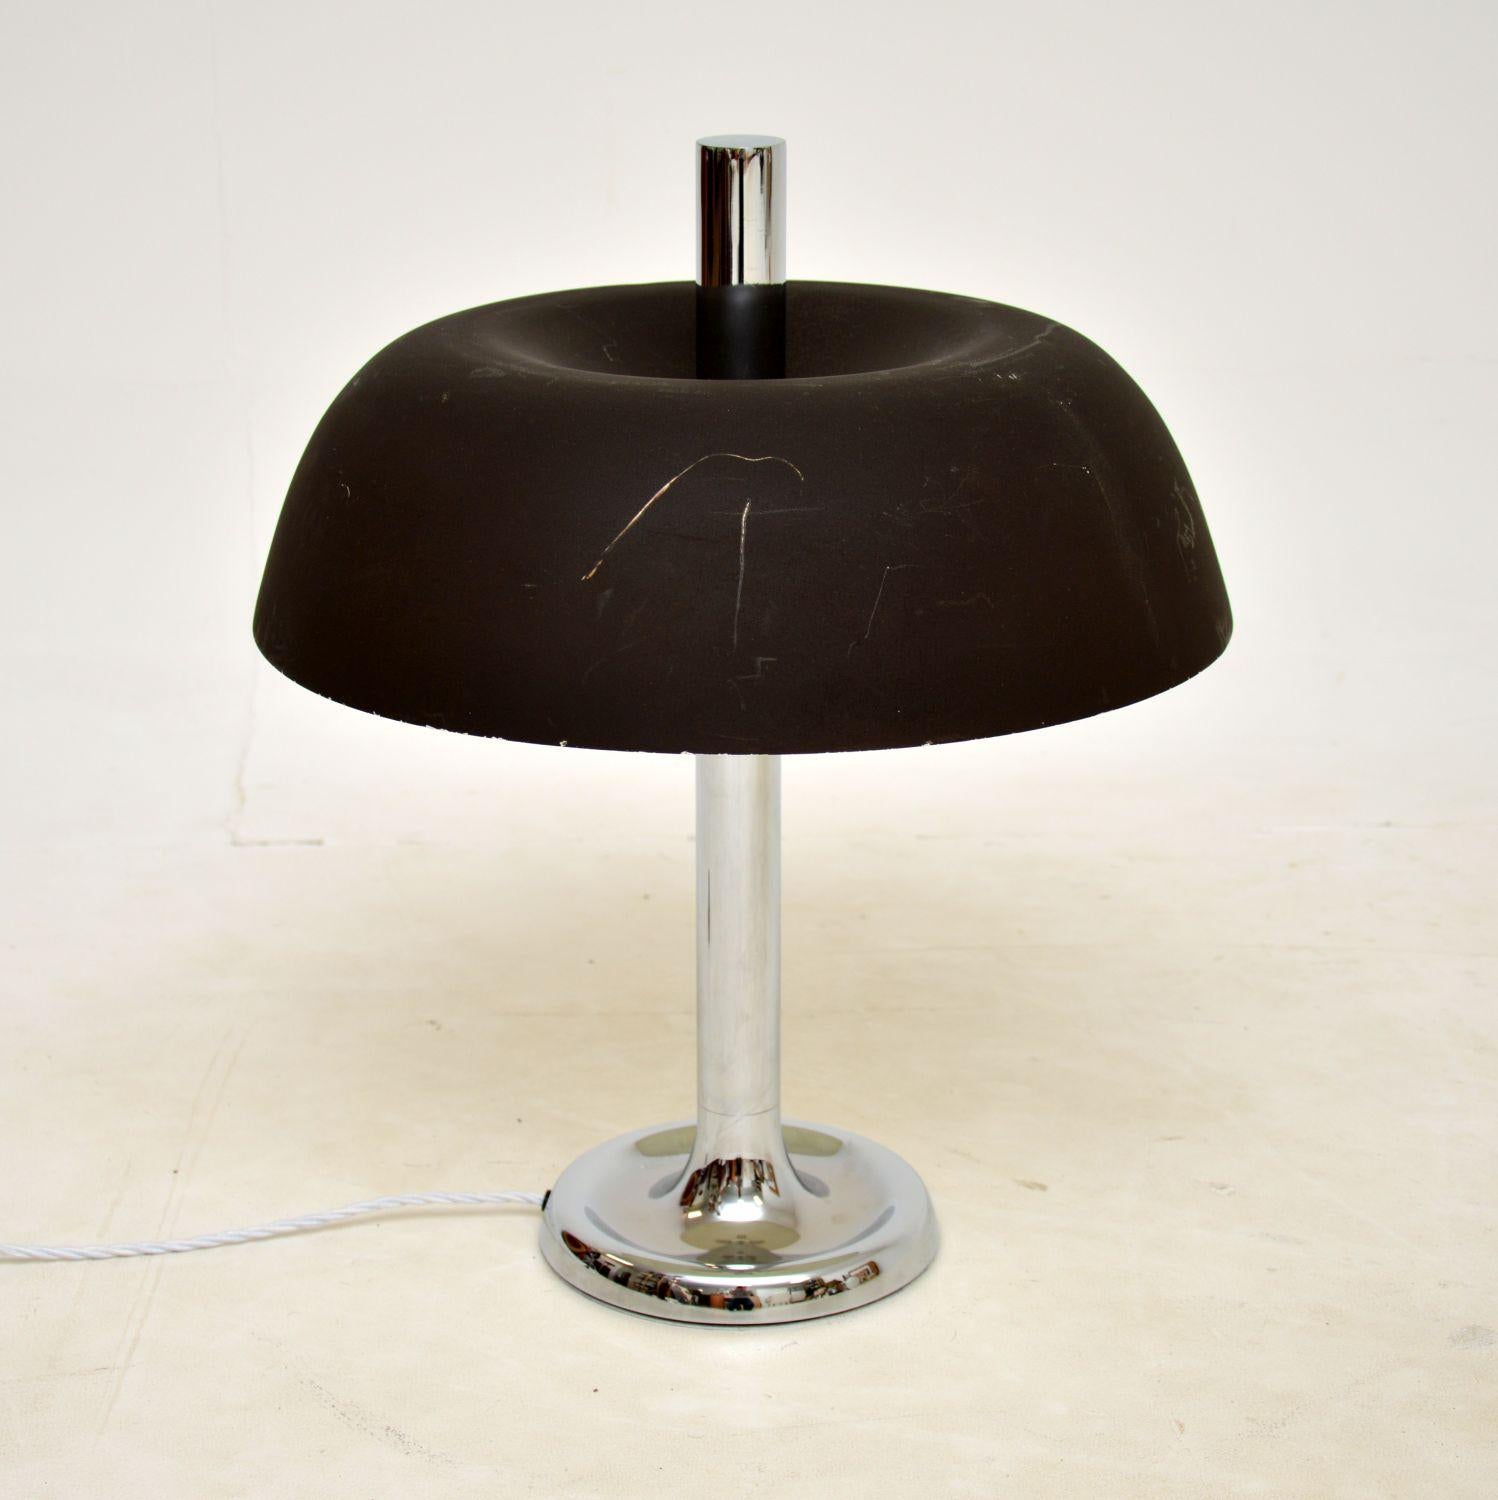 A very stylish and well made vintage chrome table / desk lamp. This was recently imported from Italy, it dates from the 1970s.

The quality is excellent, this has a beautiful design and it is an impressive Size.

The dark metal shade has some